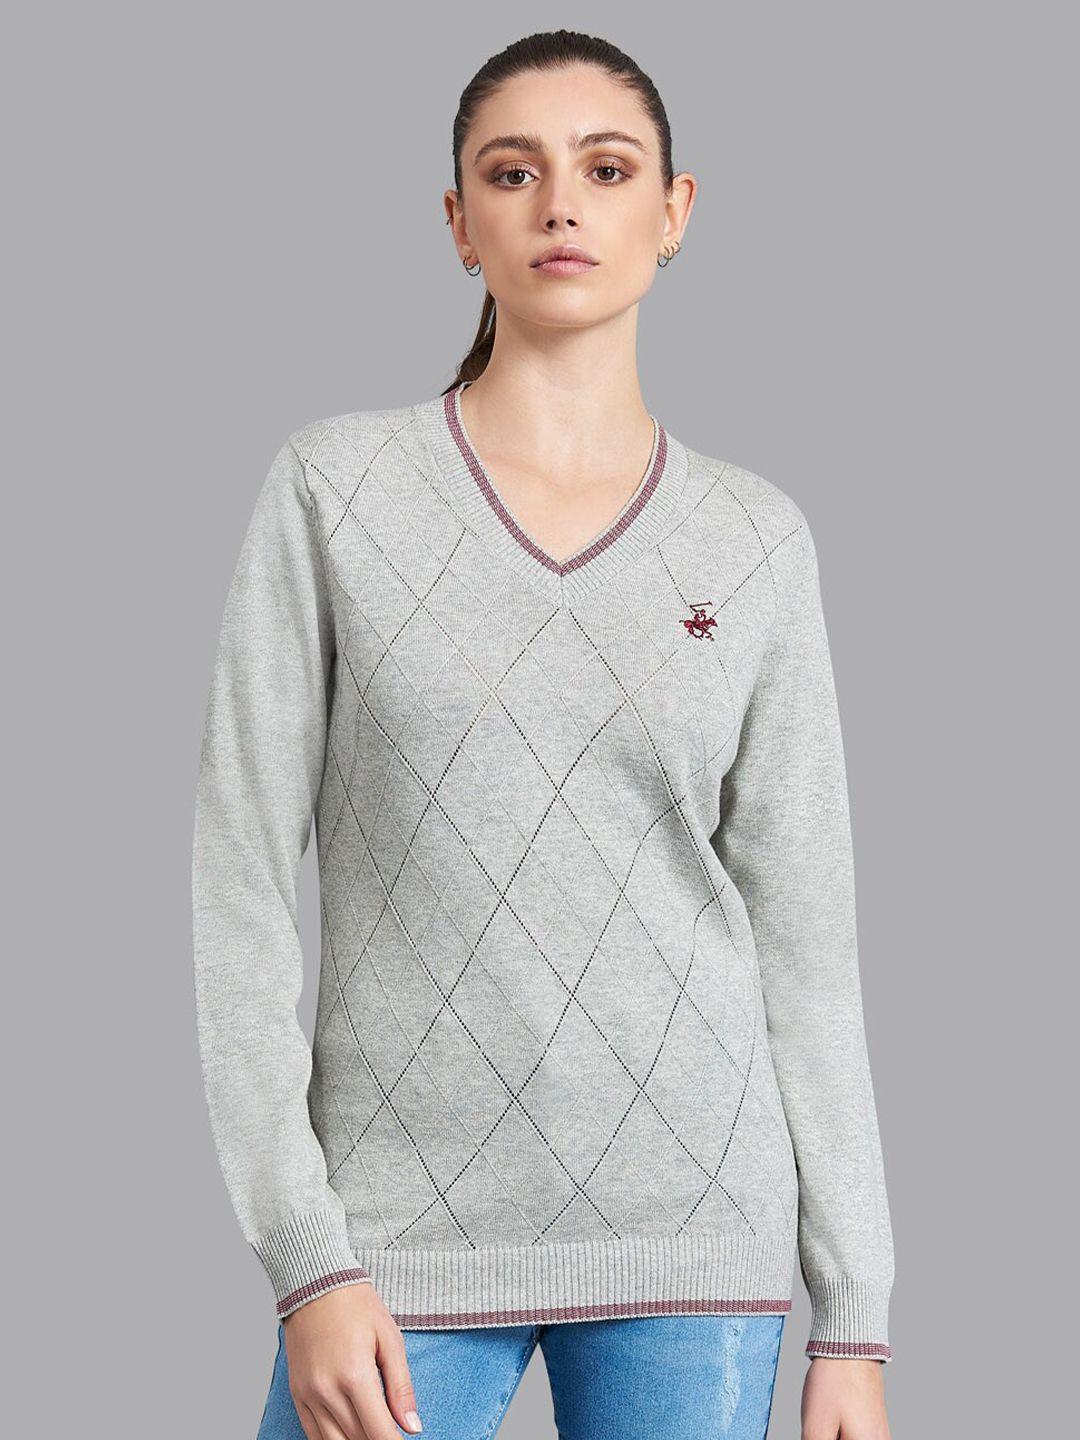 Beverly Hills Polo Club Women Grey Open Knit Pullover